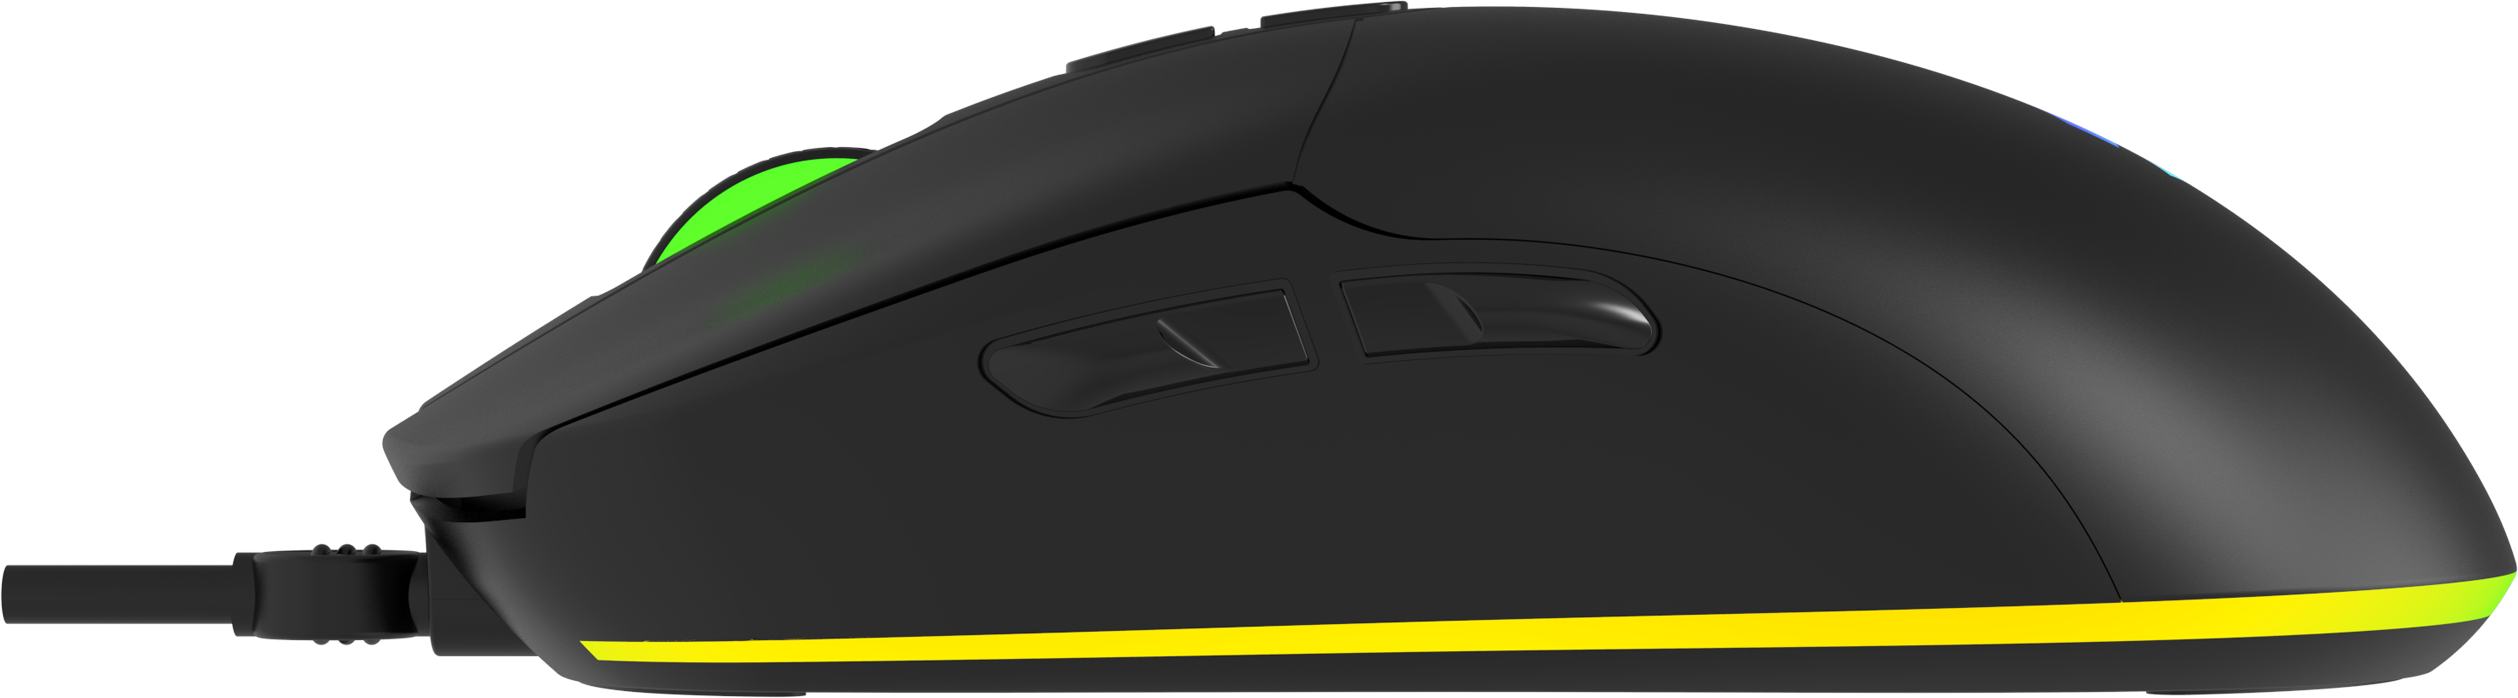 TAUROX Gaming Mouse, black